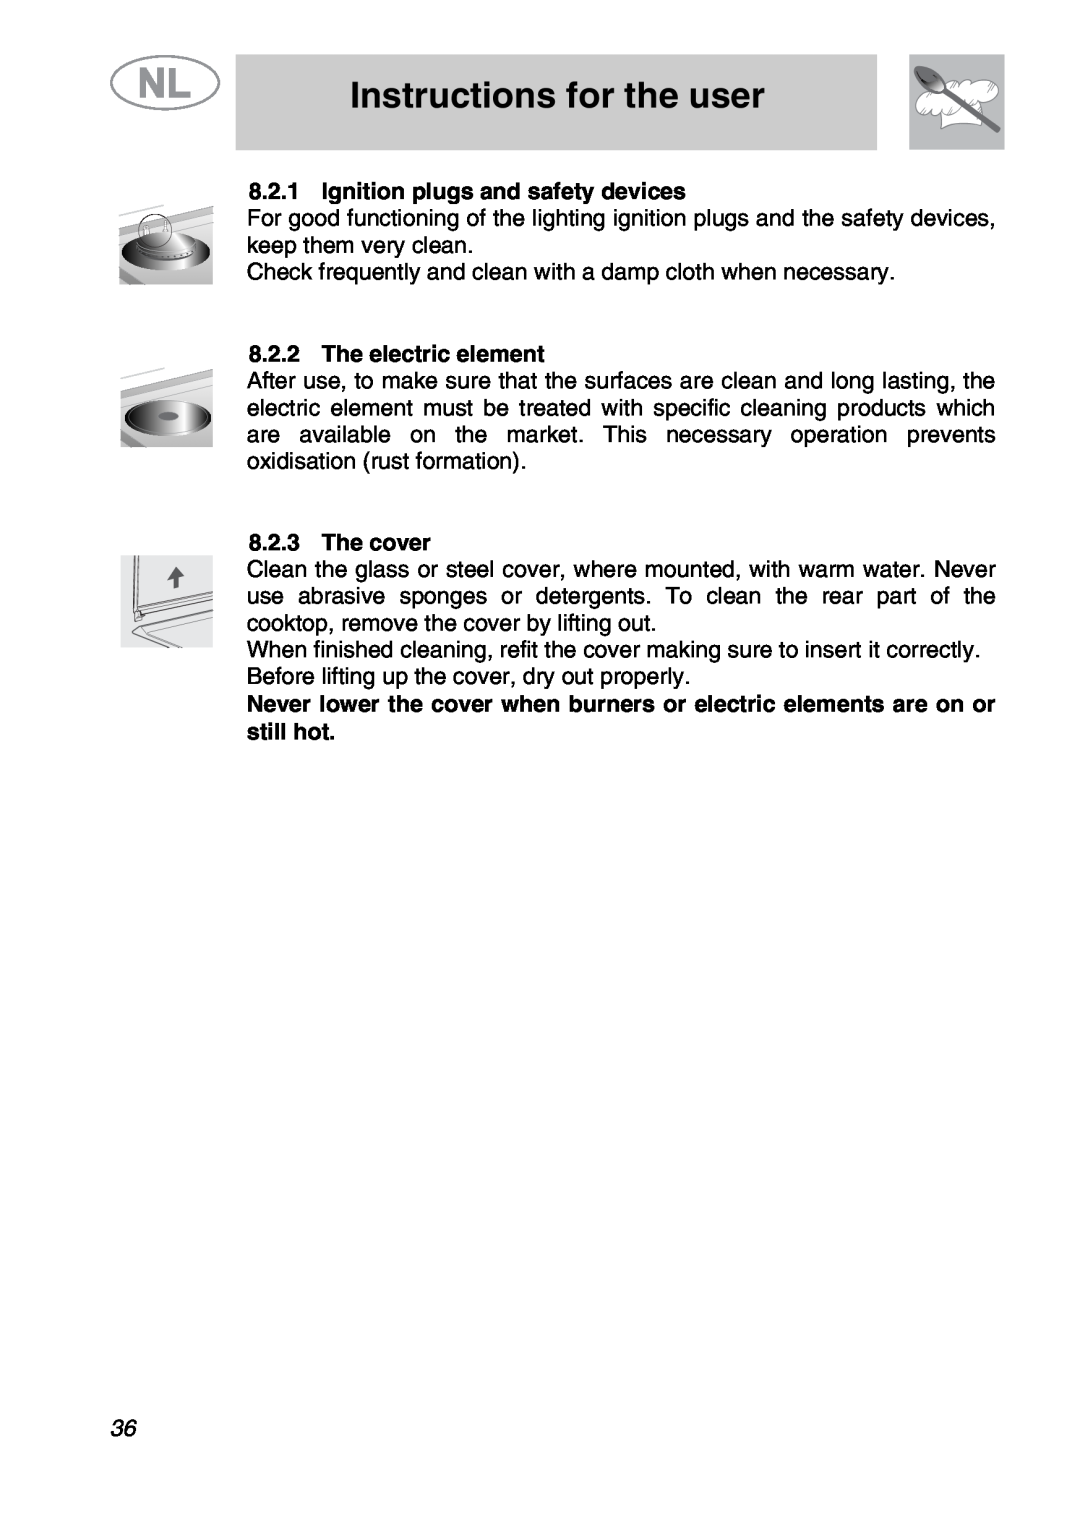 Smeg GKC955, GKCO955 manual Instructions for the user, Ignition plugs and safety devices, The electric element, The cover 